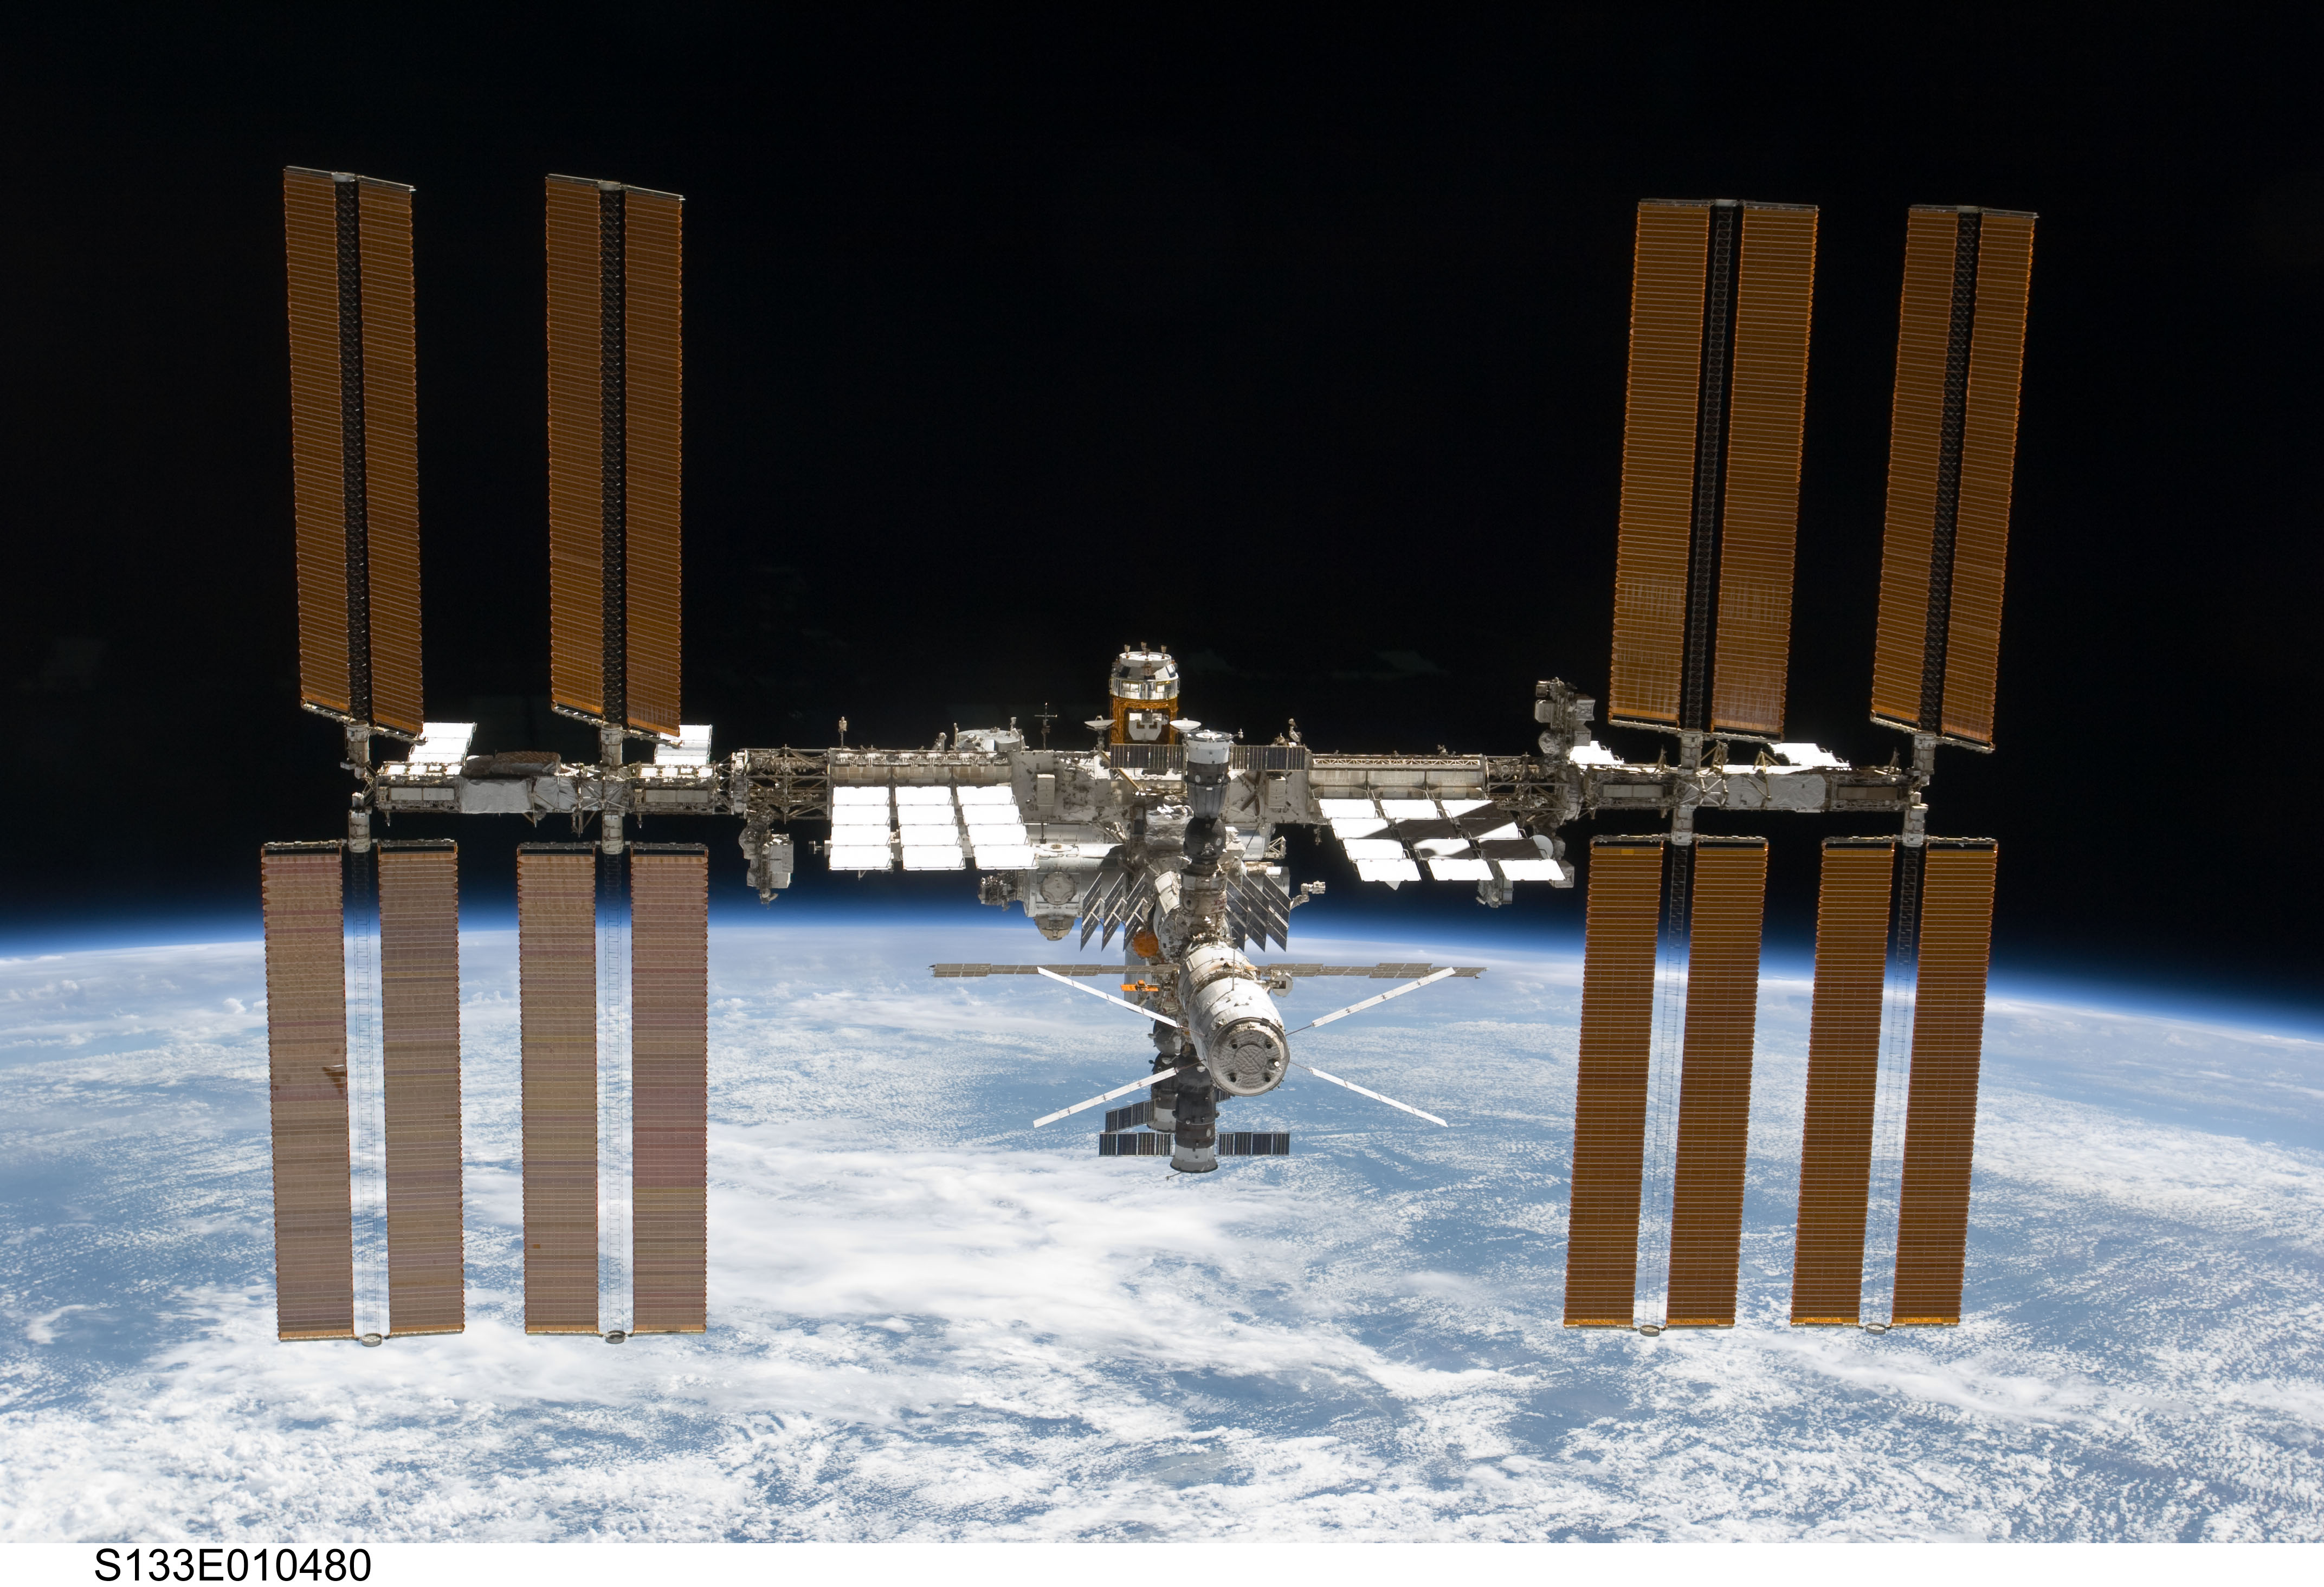 The International Space Station Expands Again